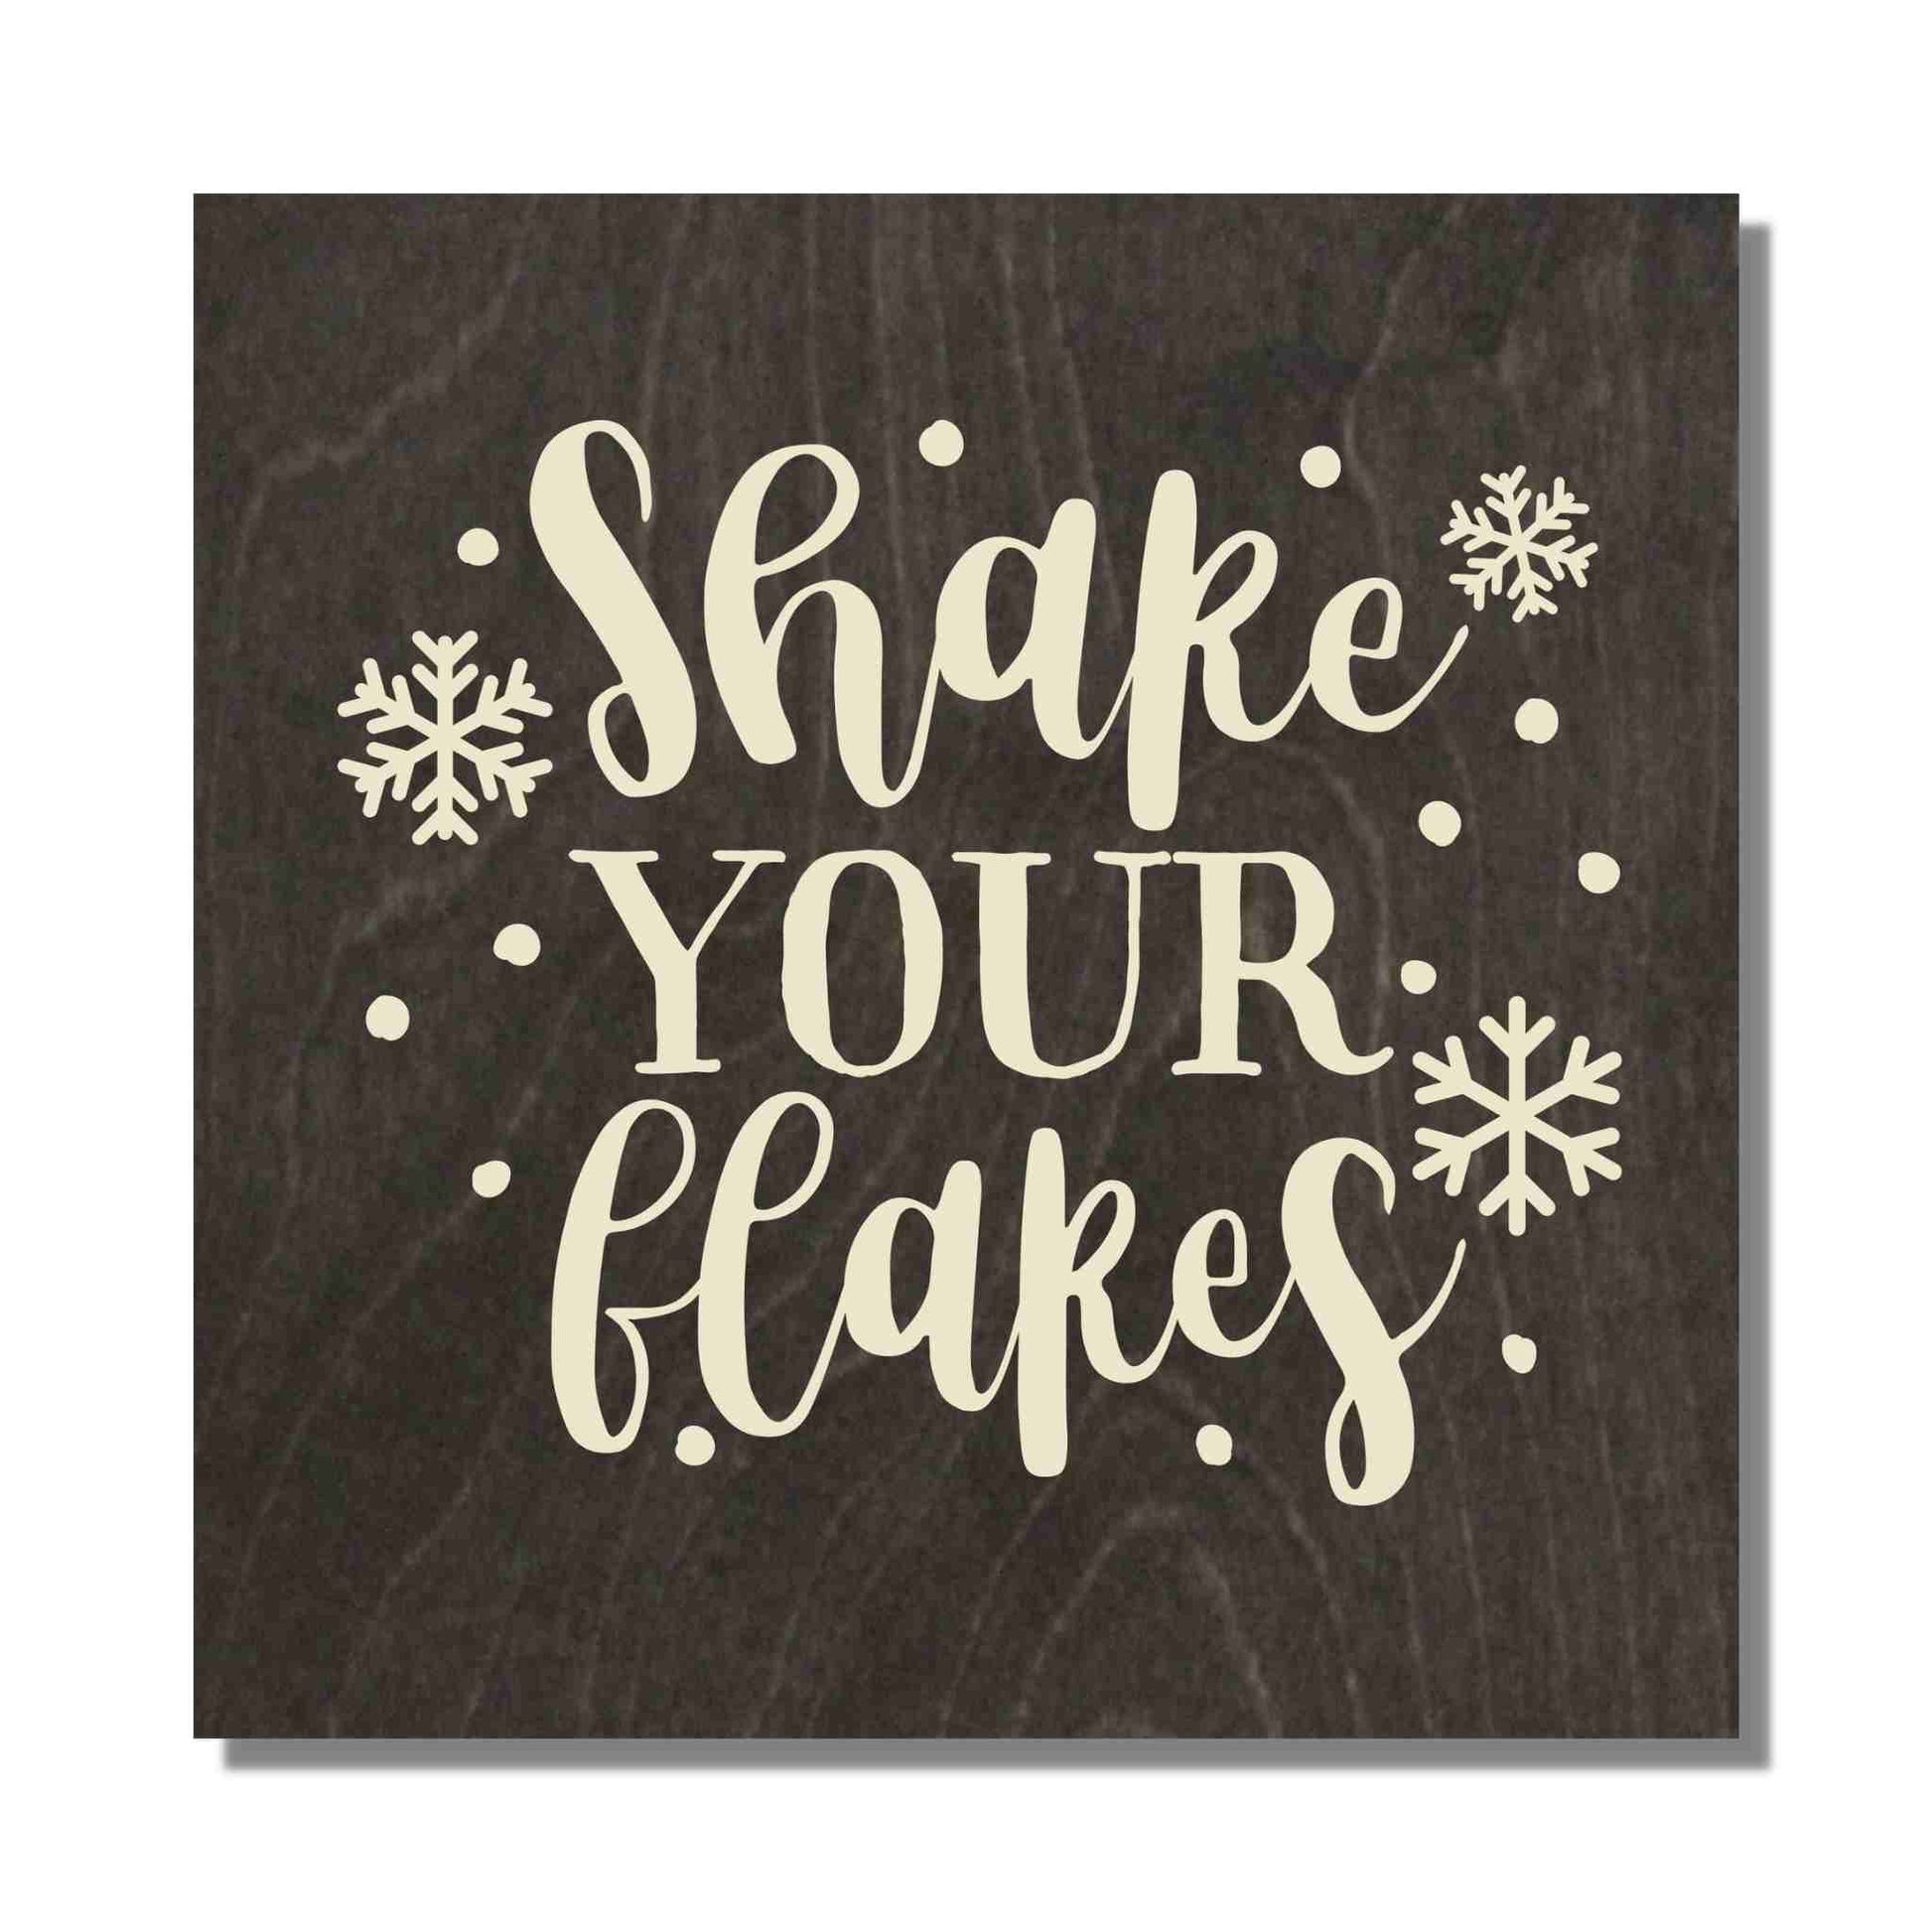 Shake Your Flakes